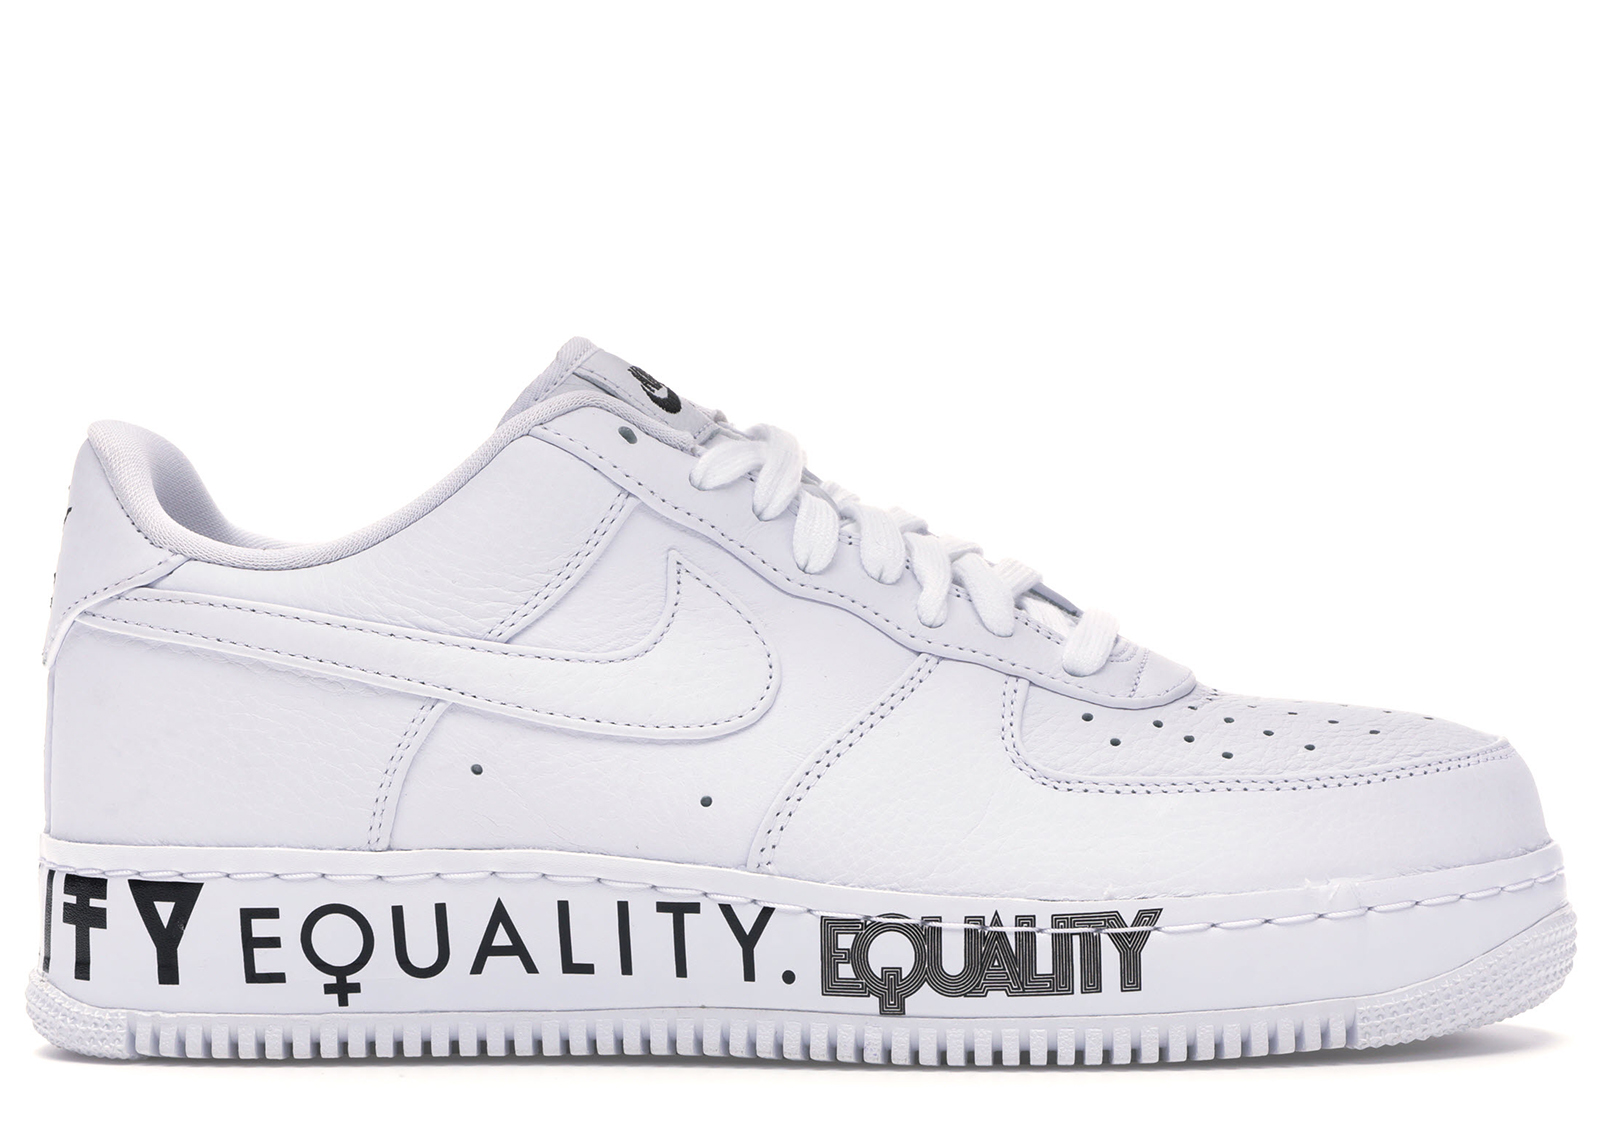 nike equality shoes for sale